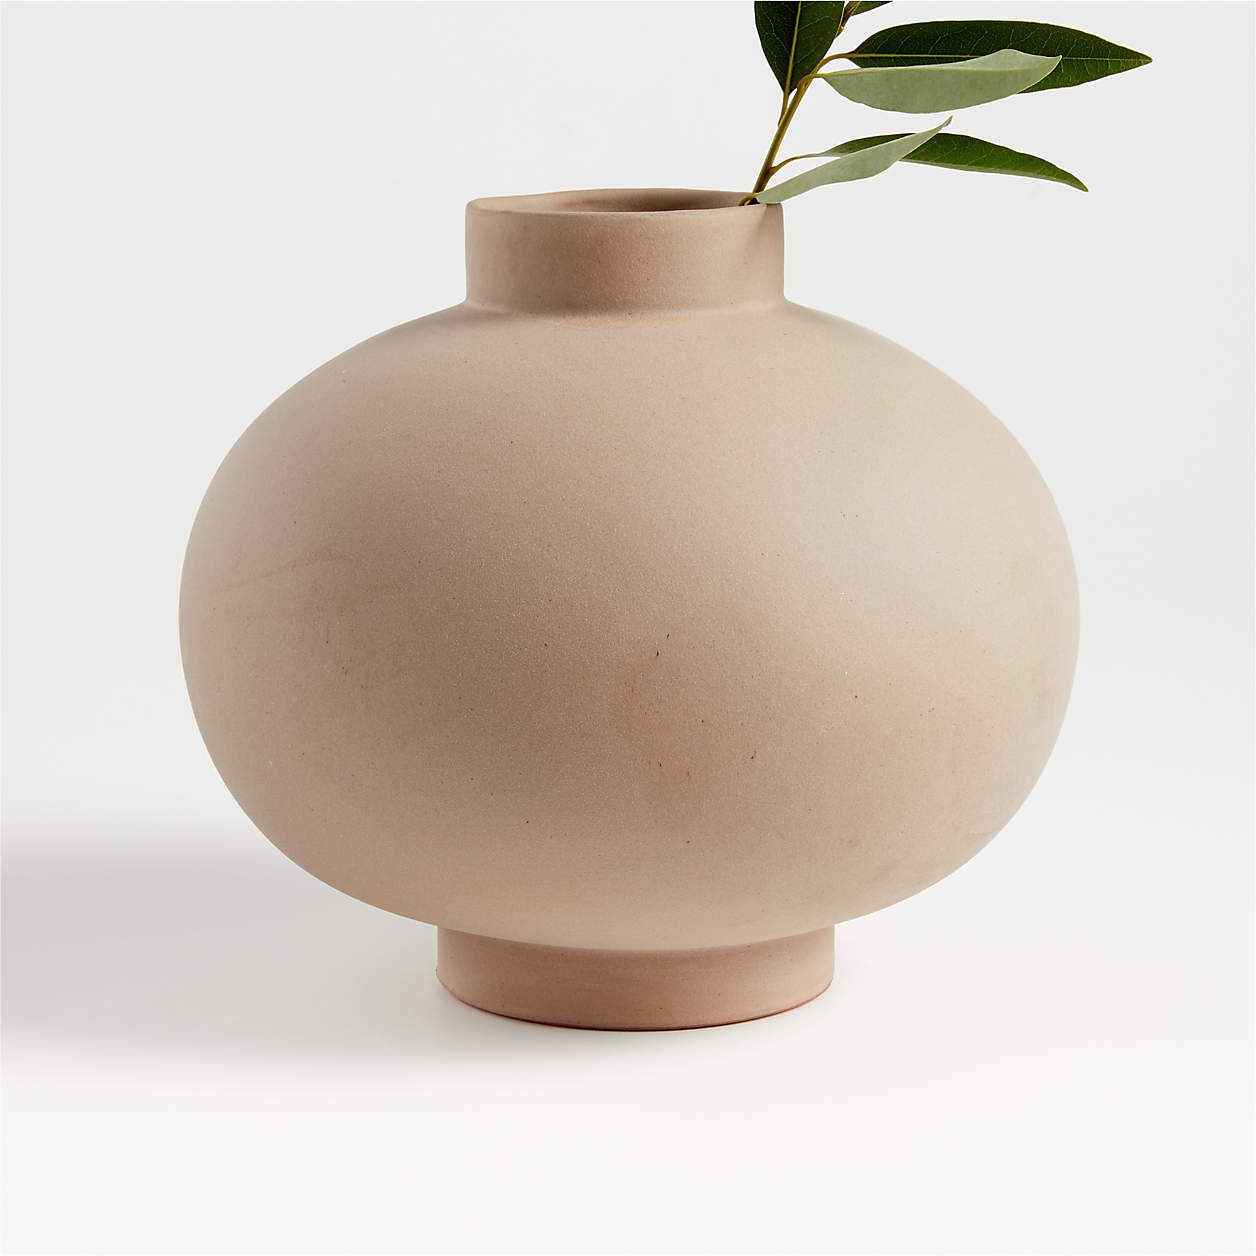 Full Moon Clay Vase by Leanne Ford - Image 3